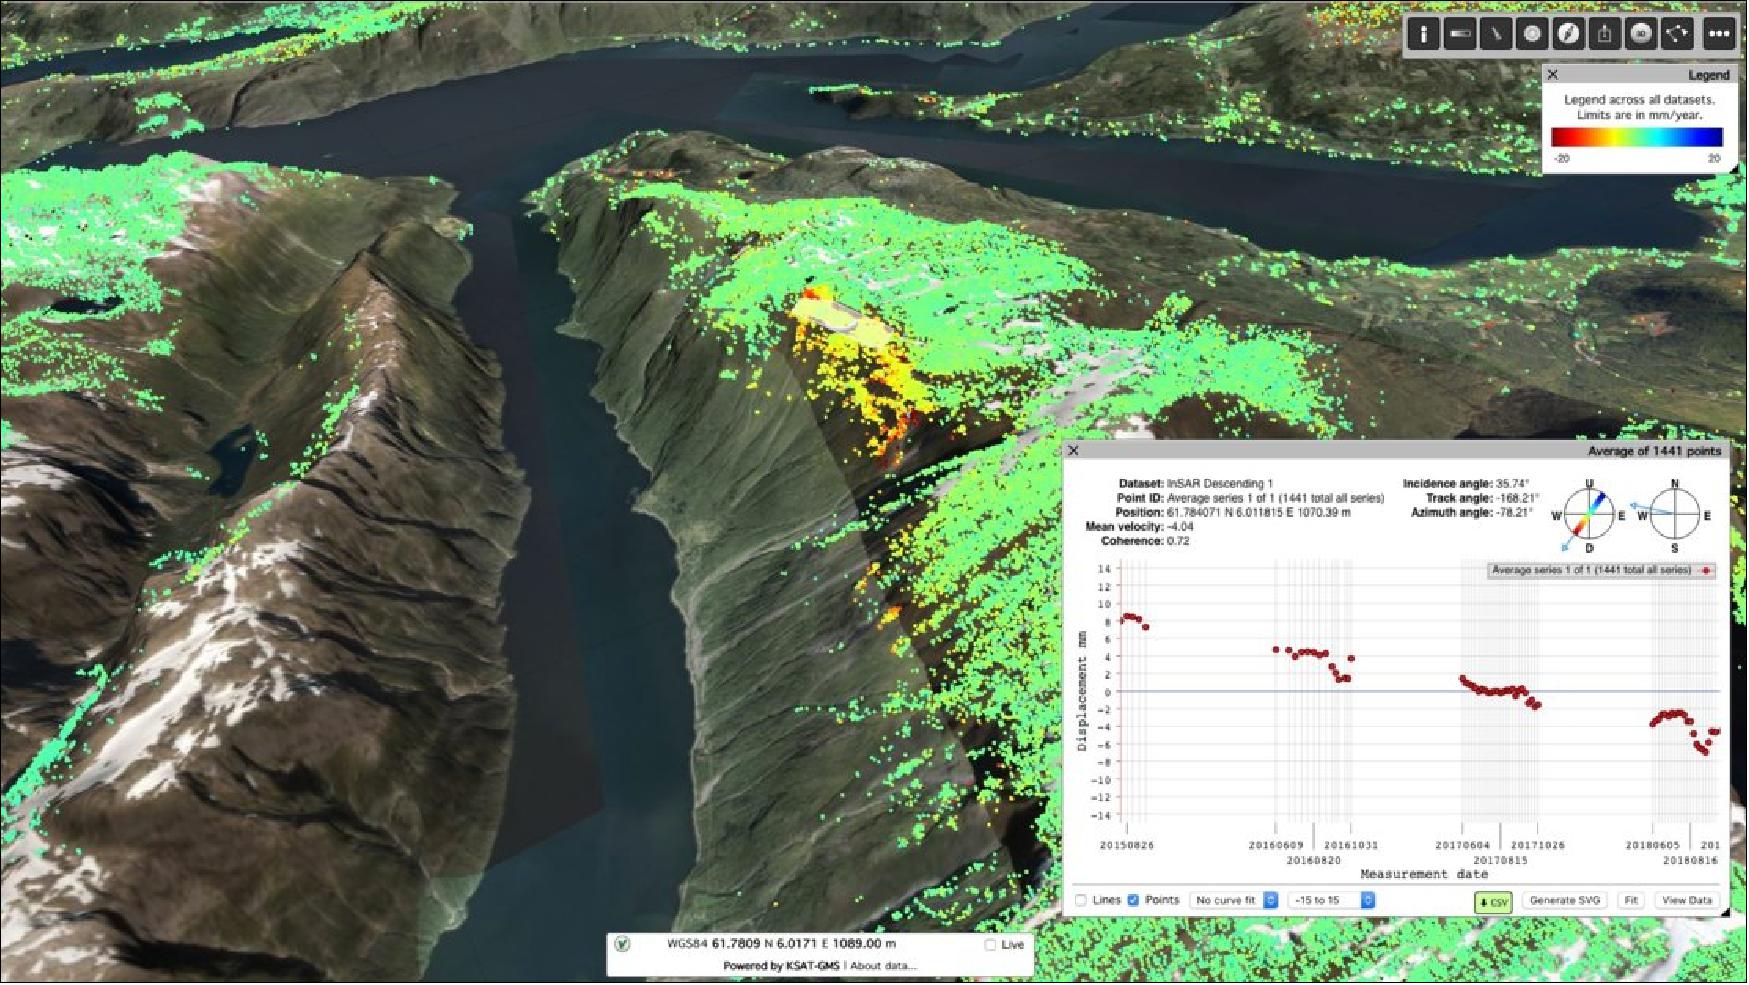 Figure 38: This 3D image map covered with InSAR measurement points showing a mountain on the move in Osmundneset, Gloppen, Norway. The dark red points correspond to subsidence of up to 2 cm/year, while green ones correspond to negligible movement. The inlet figure shows the average subsidence of 2236 points for the light grey marked polygon in the map. The average velocity of the subsidence is calculated at some 4-5 mm/year for the period 2015-2018 Image credit: ESA, the image contains modified Copernicus Sentinel data (2018)/processed by InSAR Norway and powered by KSAT-GMS)